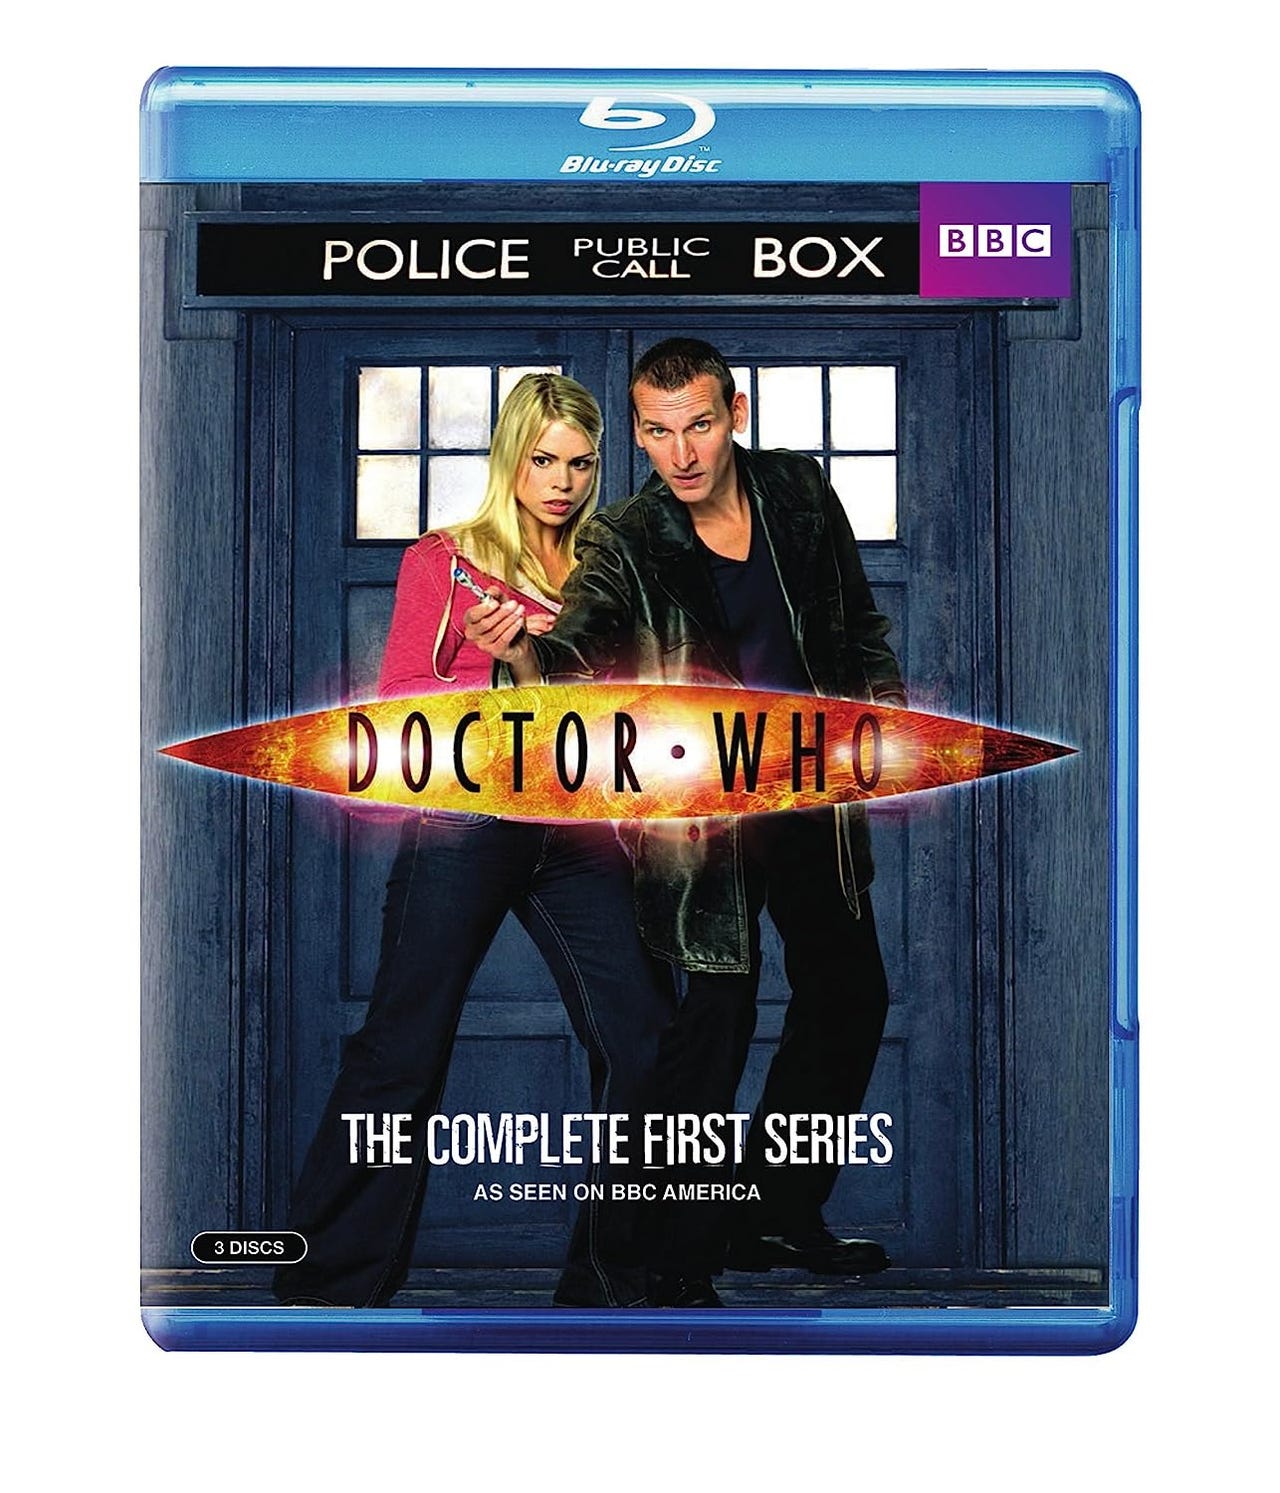 Doctor Who: The Complete First Series (Blu-ray) is 67% off for Prime Day 